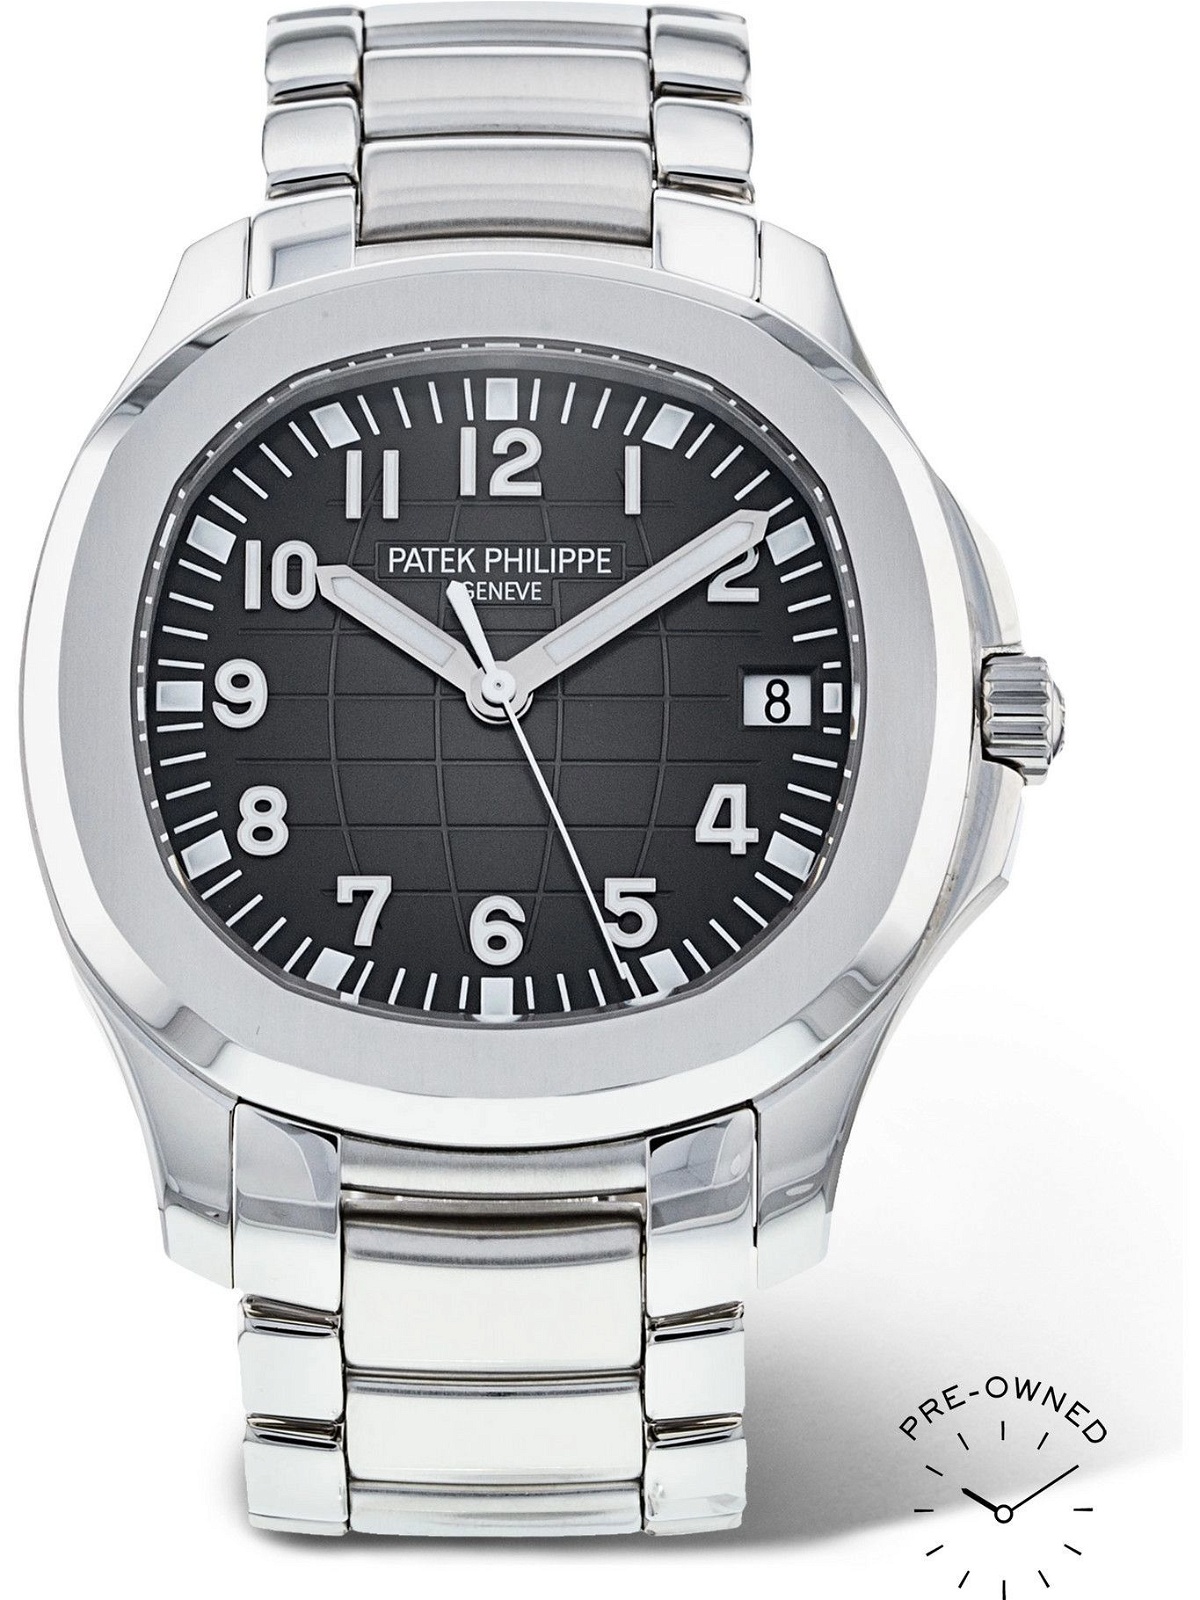 Photo: PATEK PHILIPPE - Pre-Owned 2019 Aquanaut Automatic 40mm Stainless Steel Watch, Ref. No. 5167/1A-001